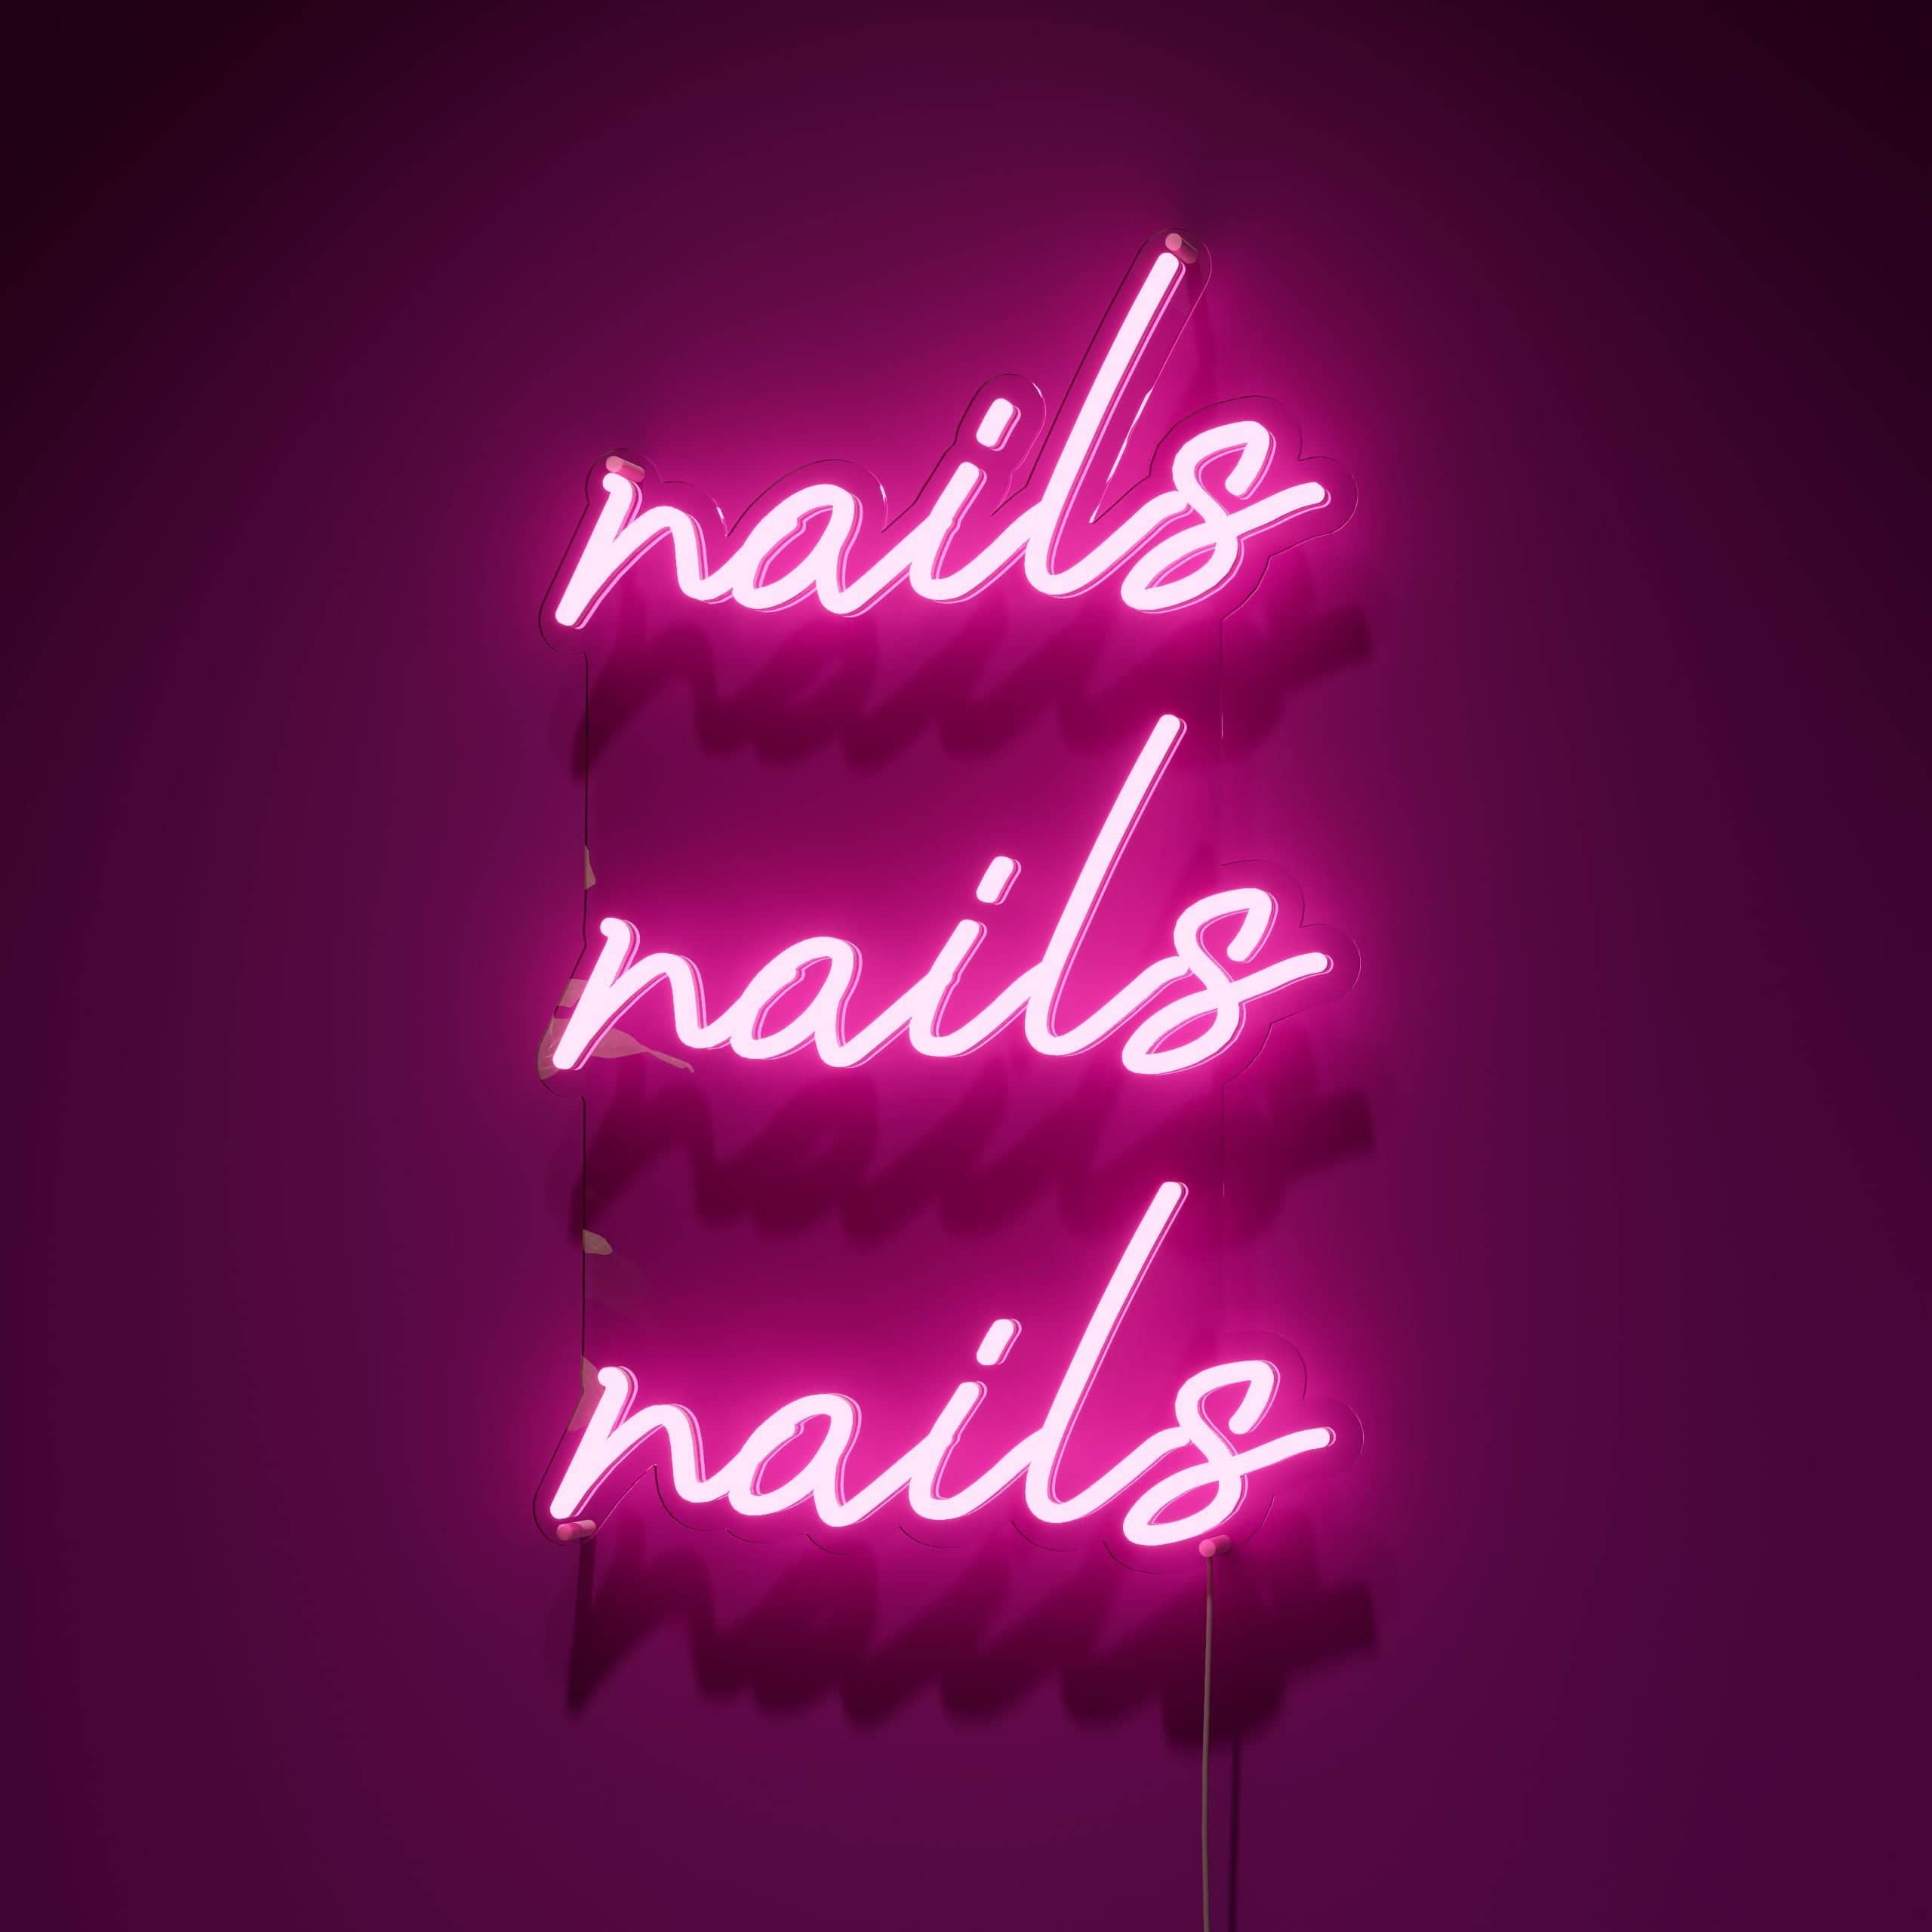 show-off-your-stunning-nail-art!-neon-sign-lite